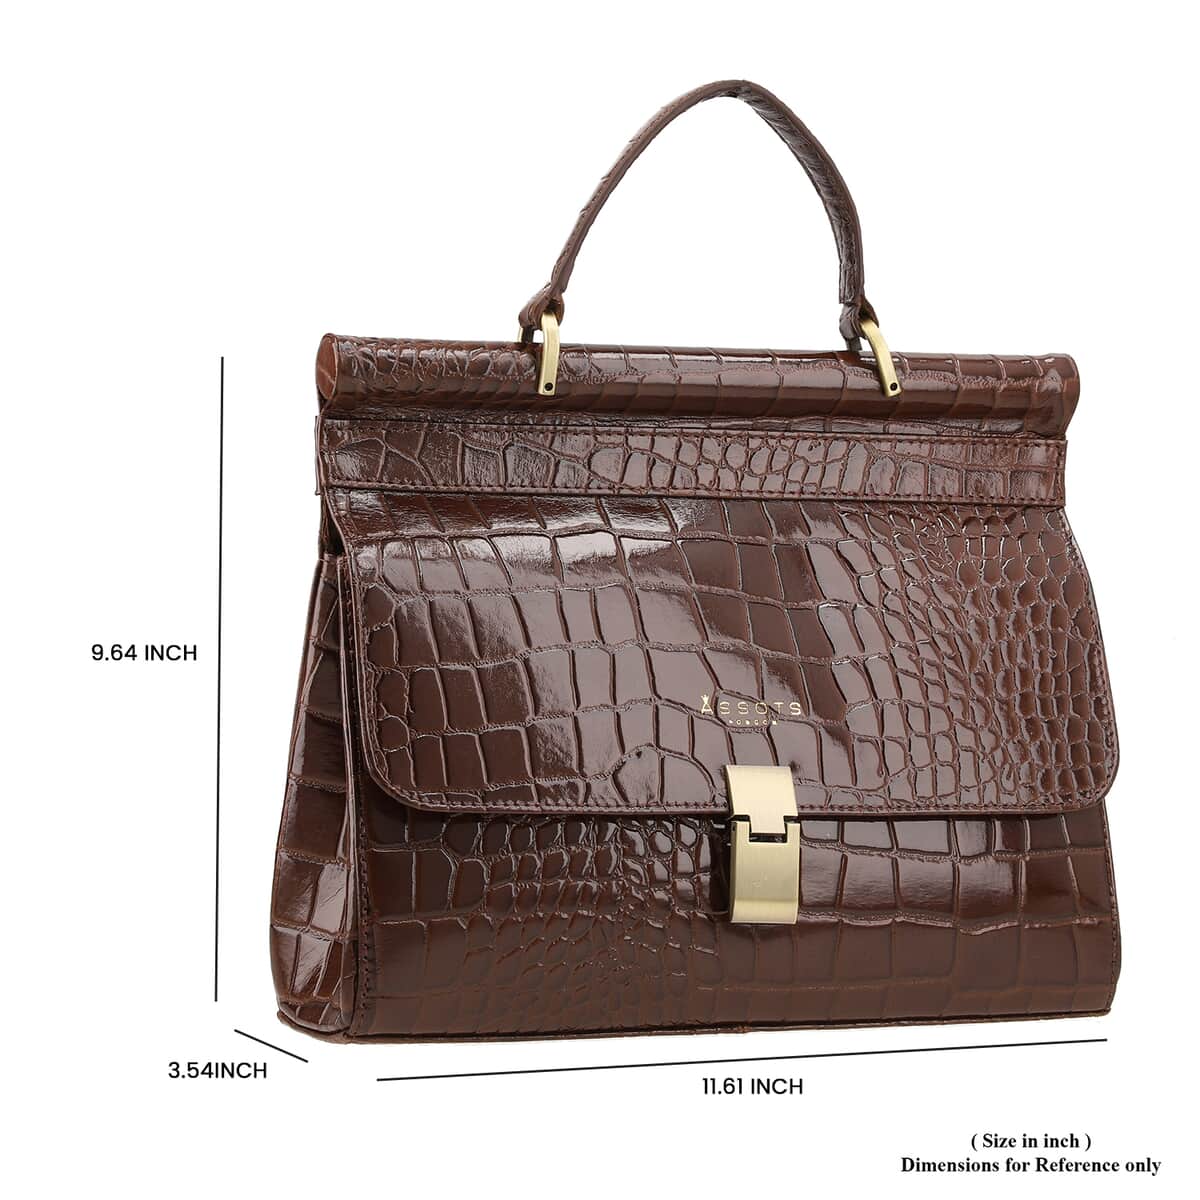 Assots London Brown Genuine Leather Croco Embossed Satchel Bag For Women With Adjustable Detachable Shoulder Strap And Button Closure (11.61X3.54X9.64) image number 4